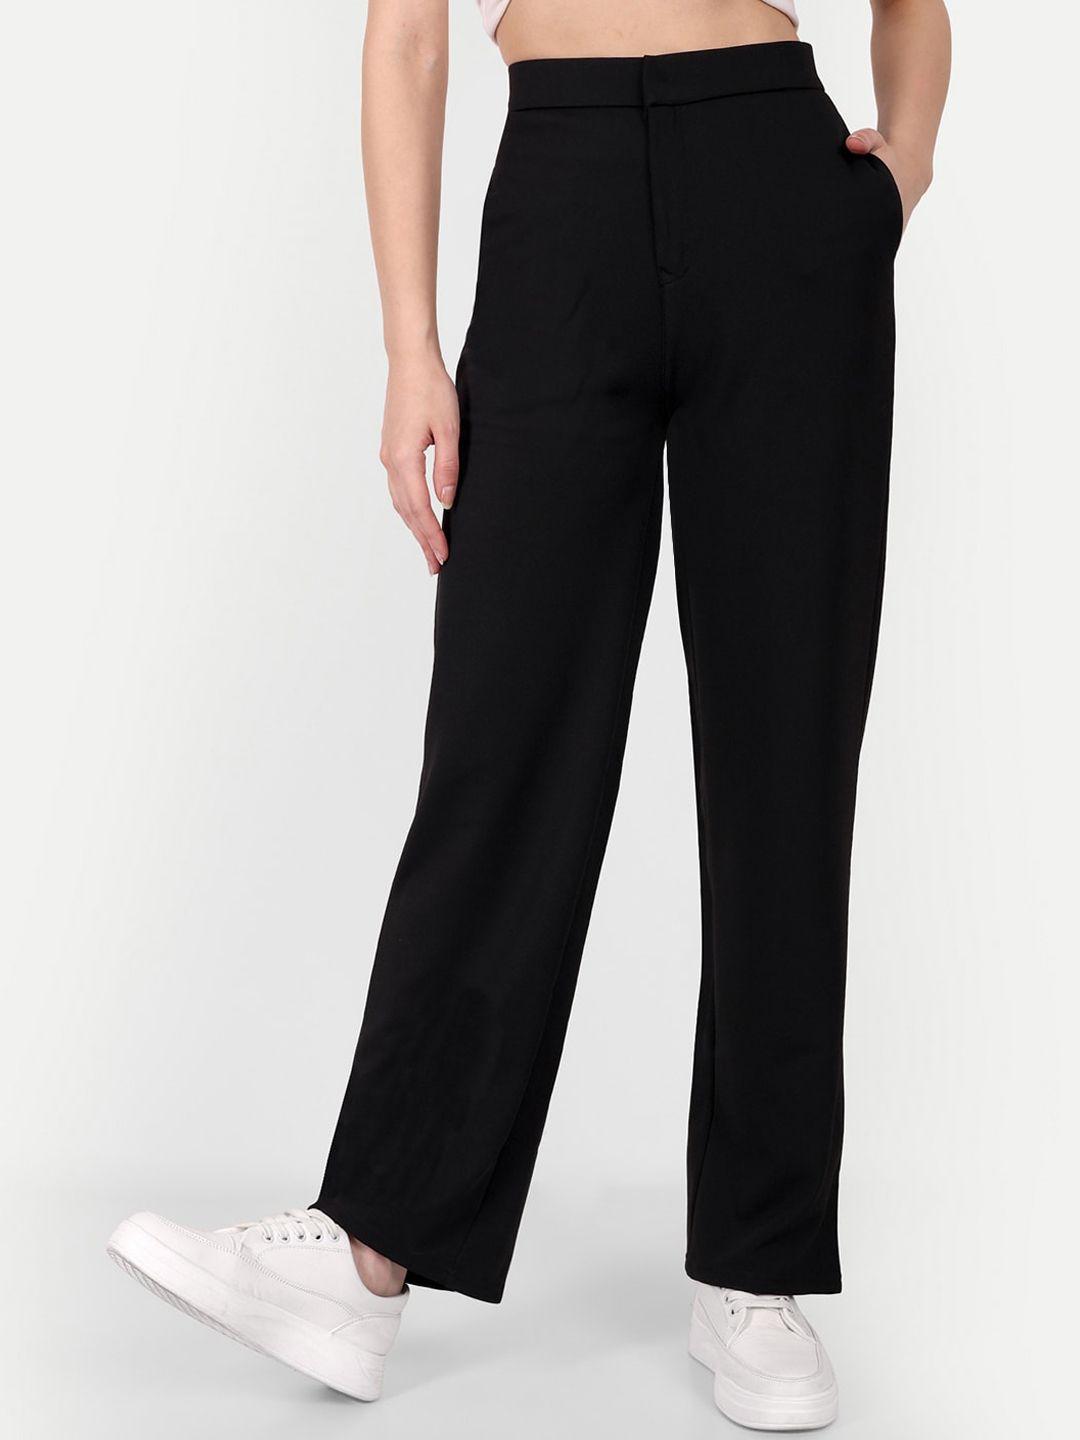 broadstar-women-smart-straight-fit-high-rise-easy-wash-trousers